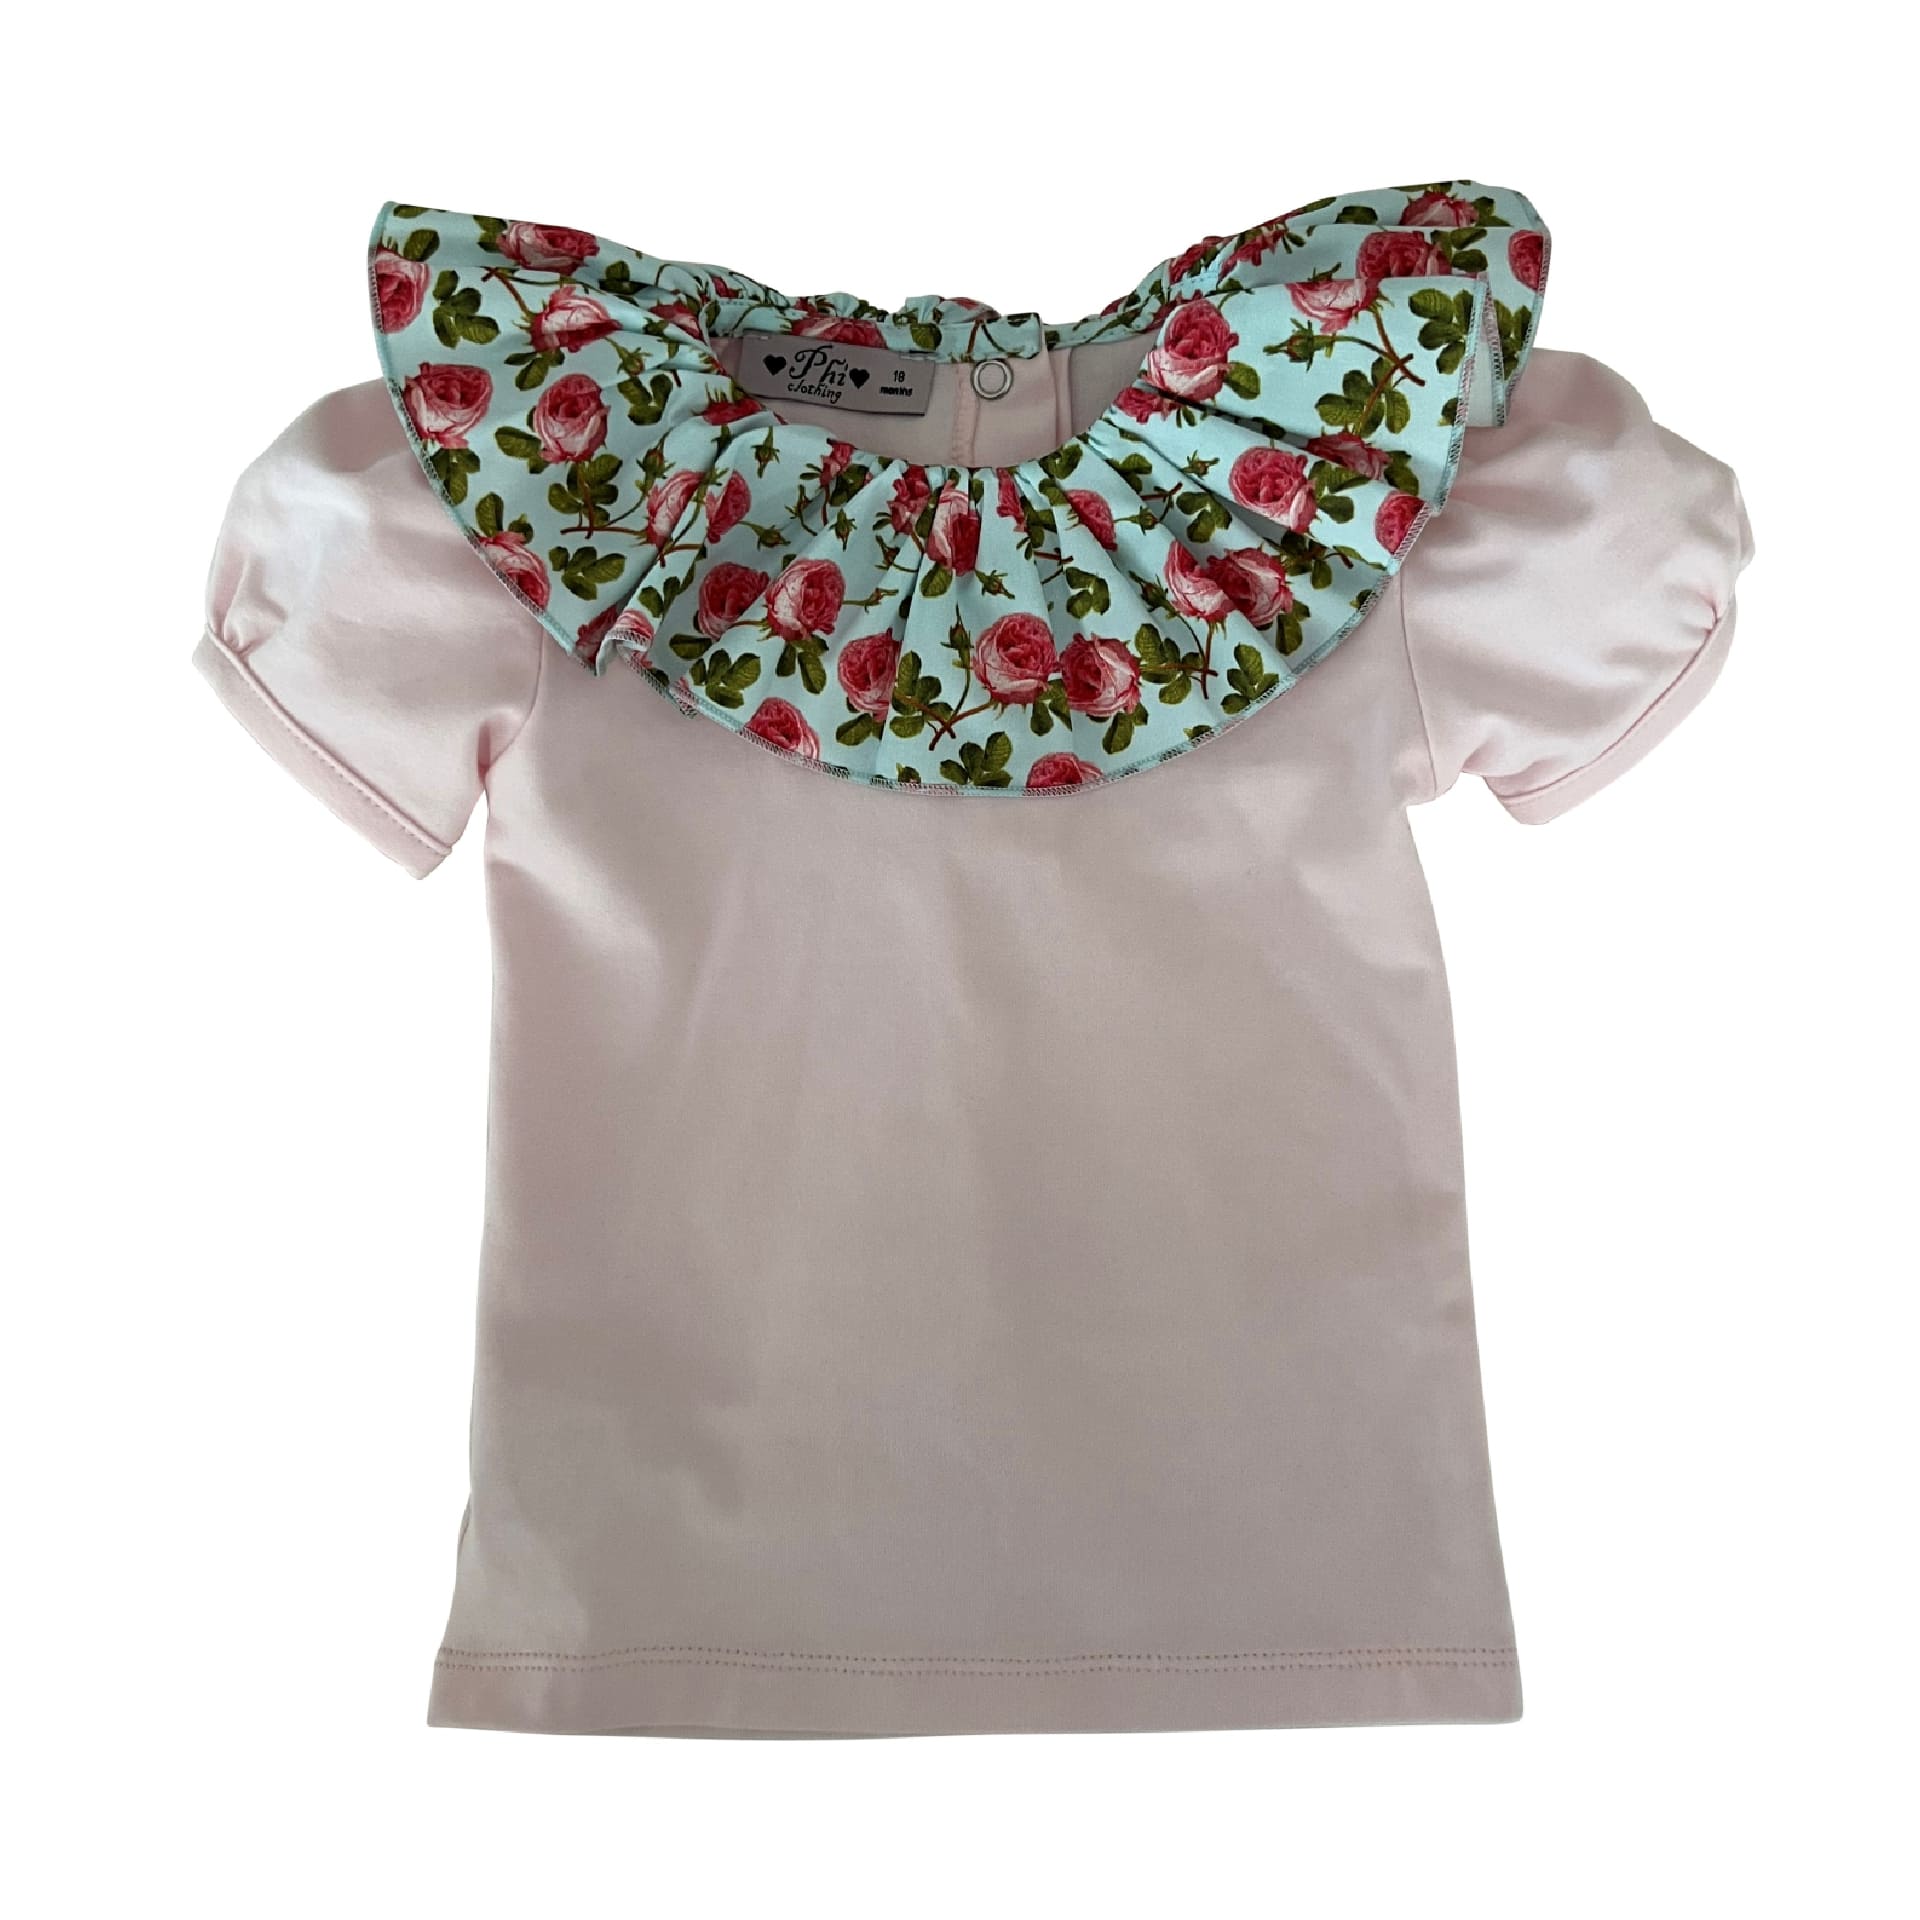 Pink tshirt with blue with pink roses collar